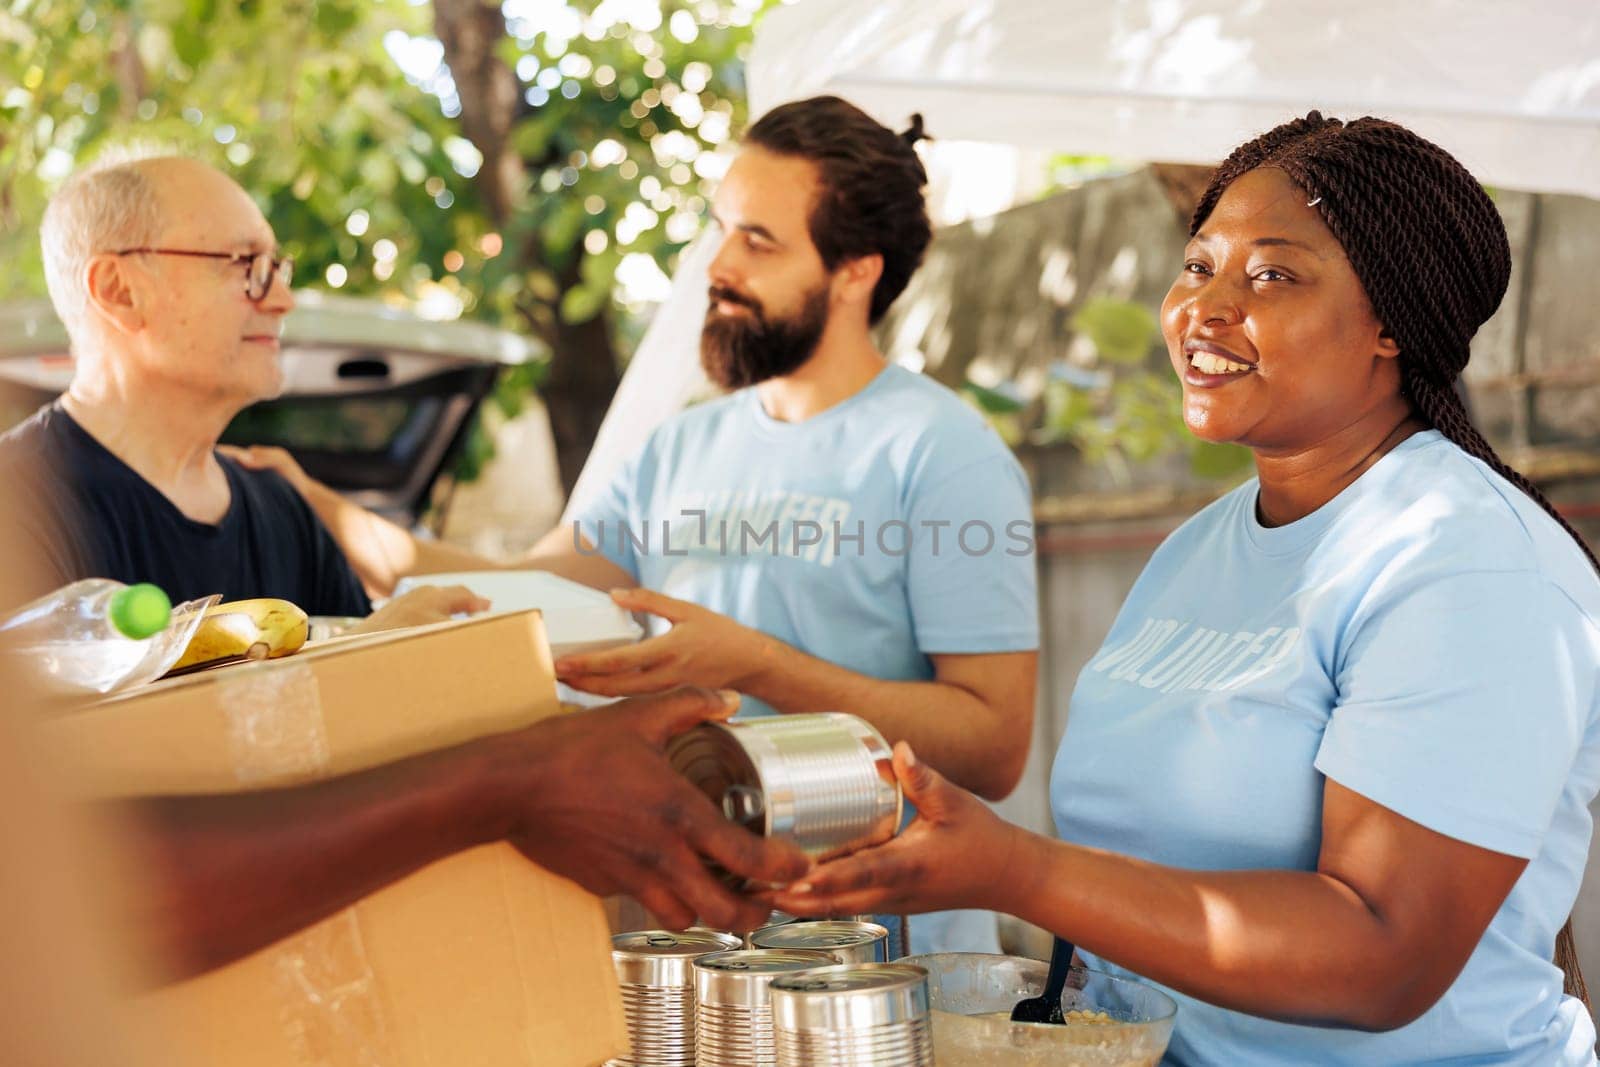 African american and caucasian volunteers provide aid, giving donation boxes filled with non-perishable items to the poor. Multiethnic team helps fight hunger and poverty through charitable efforts.